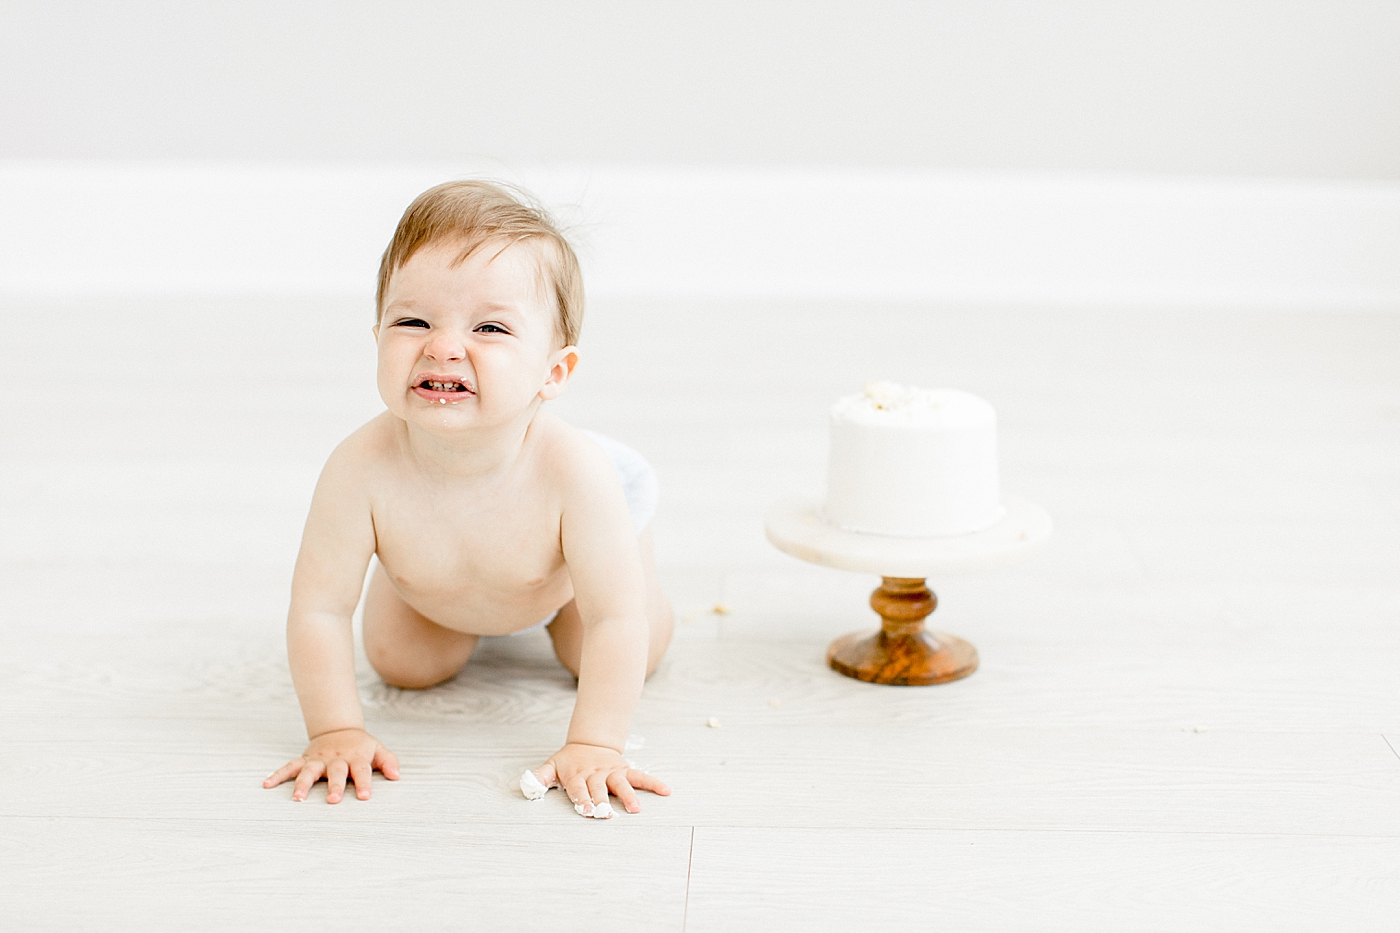 One year old crawling away from cake during cake smash photoshoot. Photo by Brittany Elise Photography.